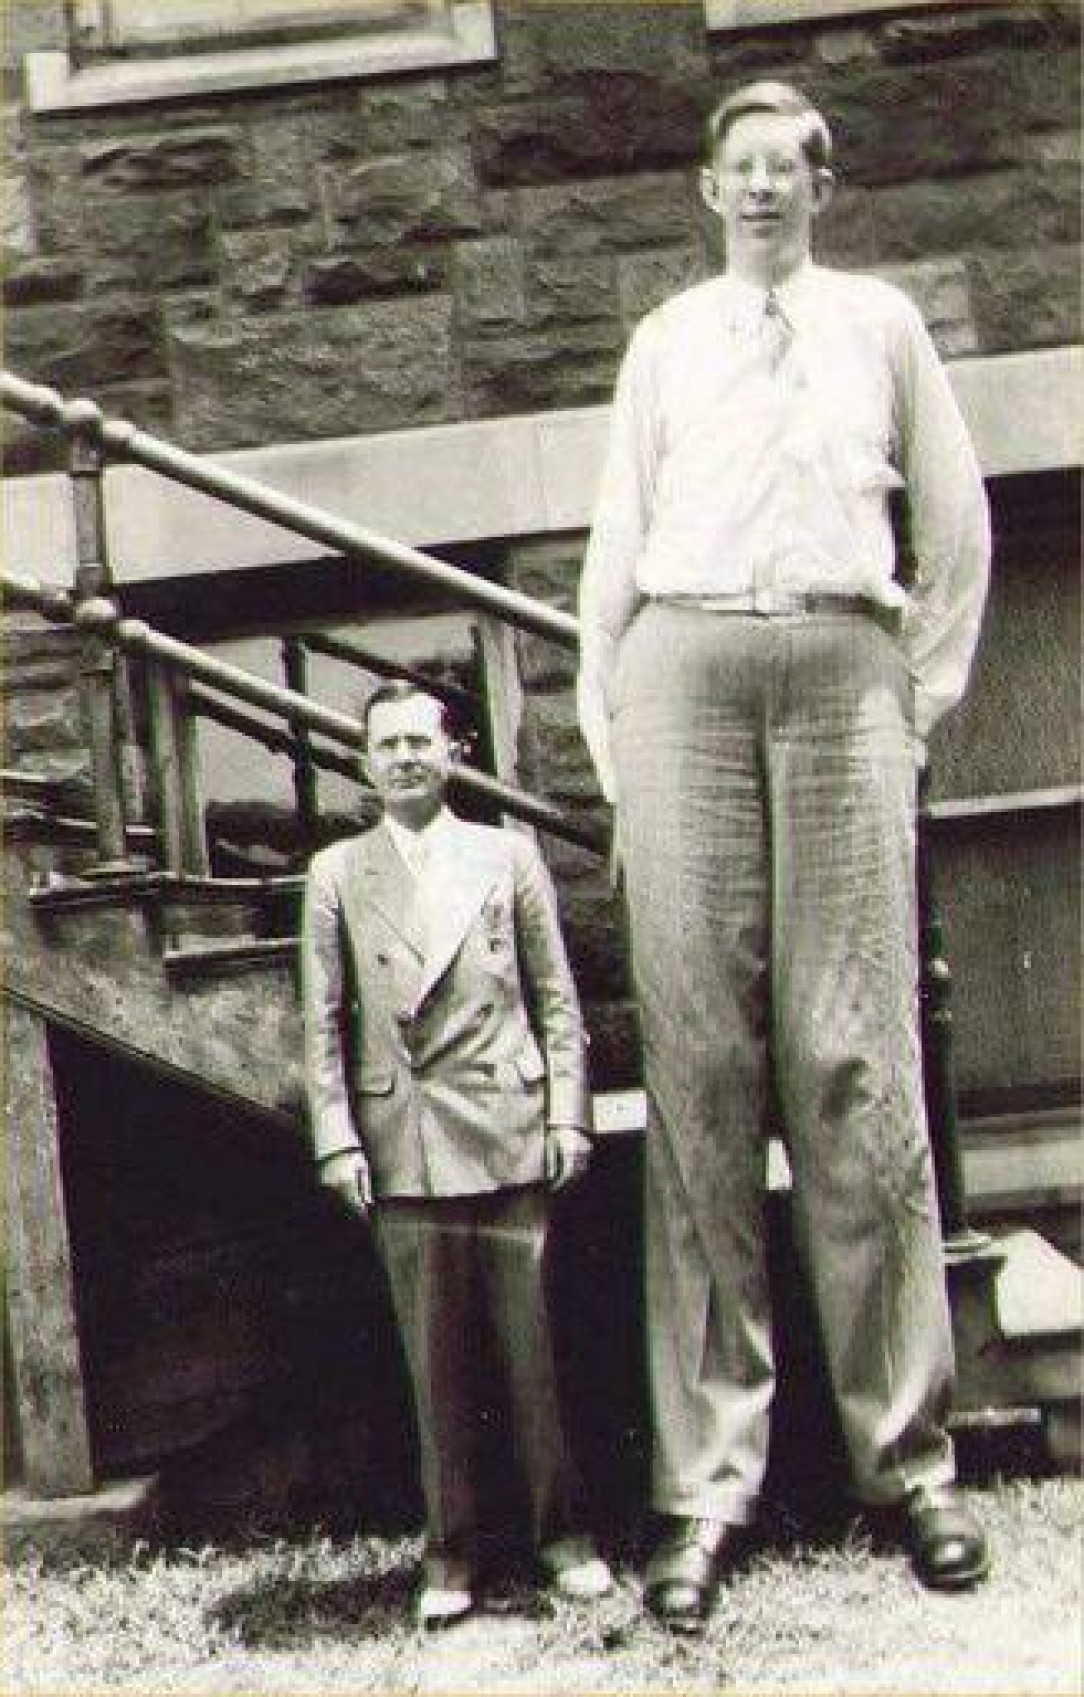 Robert Wadlow (8’11) standing next to his father (5’11)